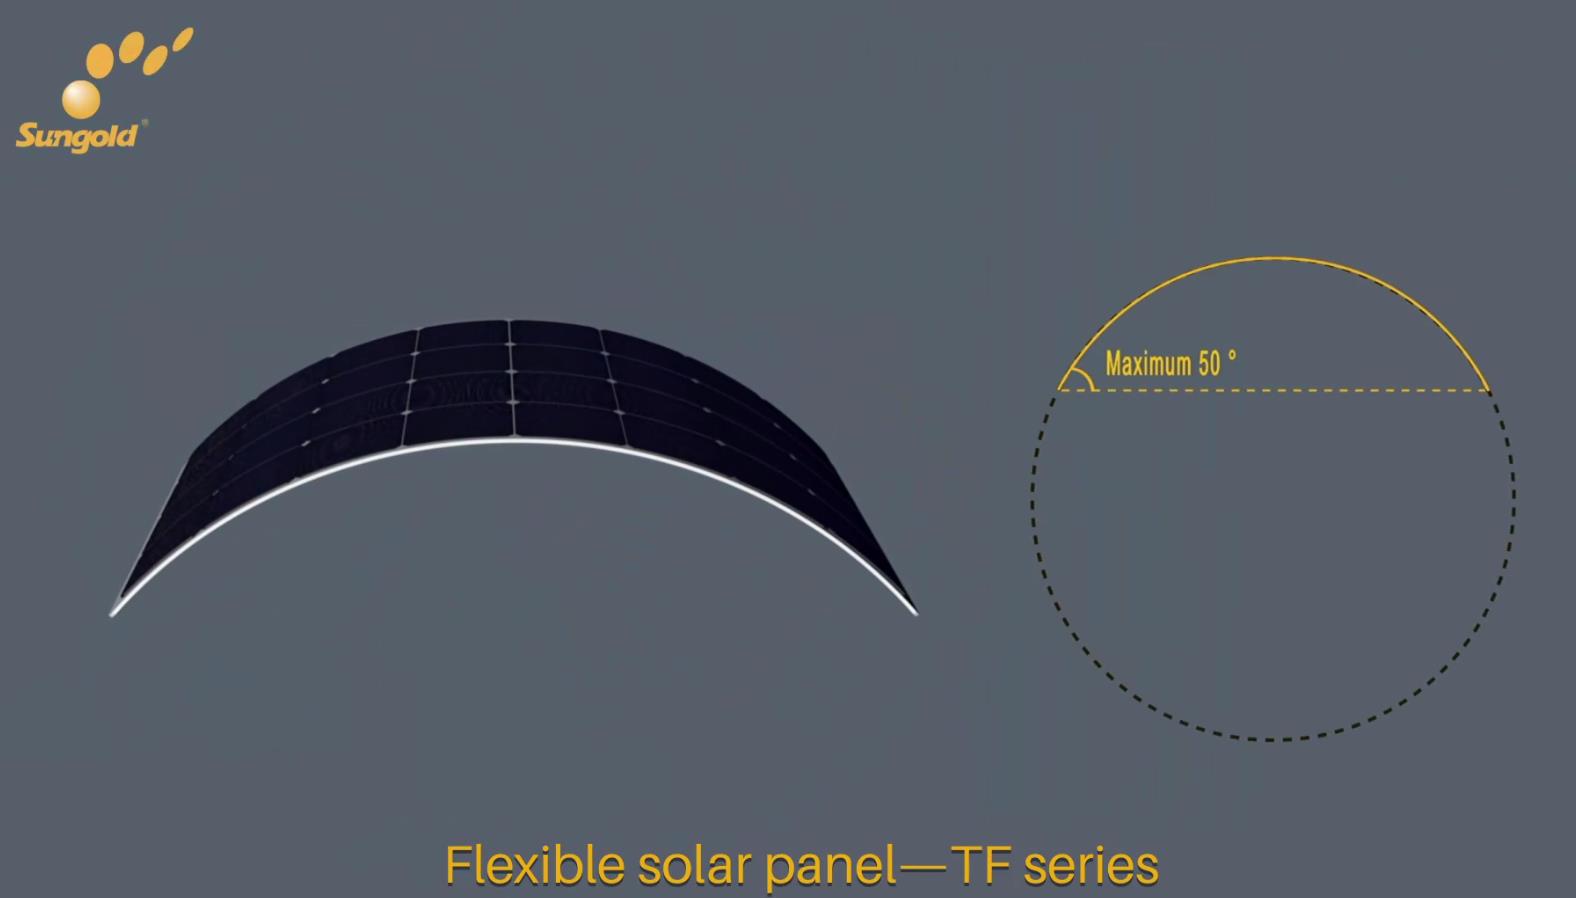 Flexible Solar Panels For Rvs Pros Cons And2022 Best Ones To Buy 3096